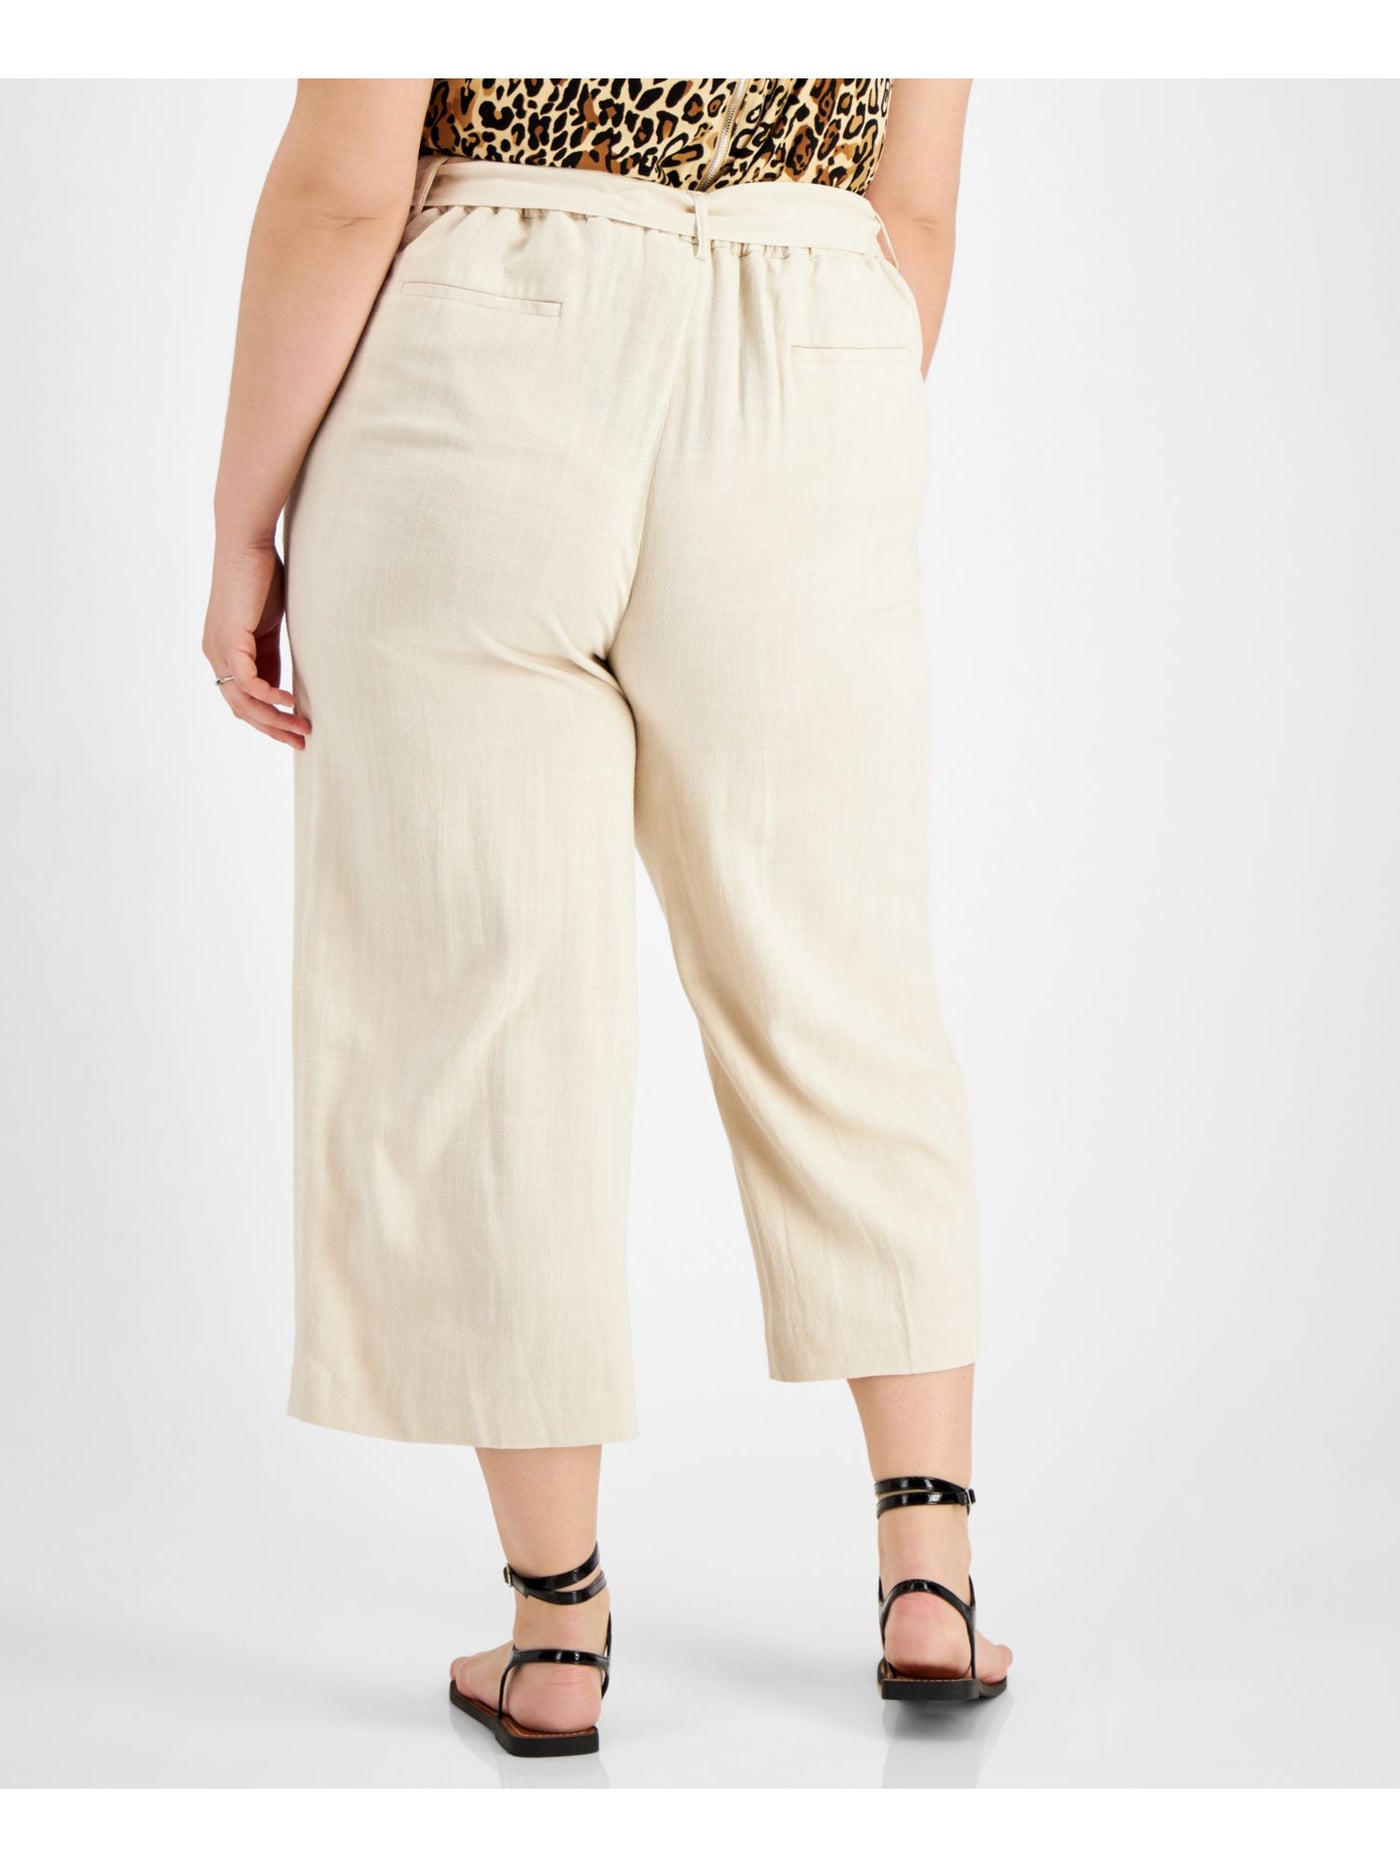 BAR III Womens Beige Pocketed Belted Straight Cropped High Waist Pants Plus 14W